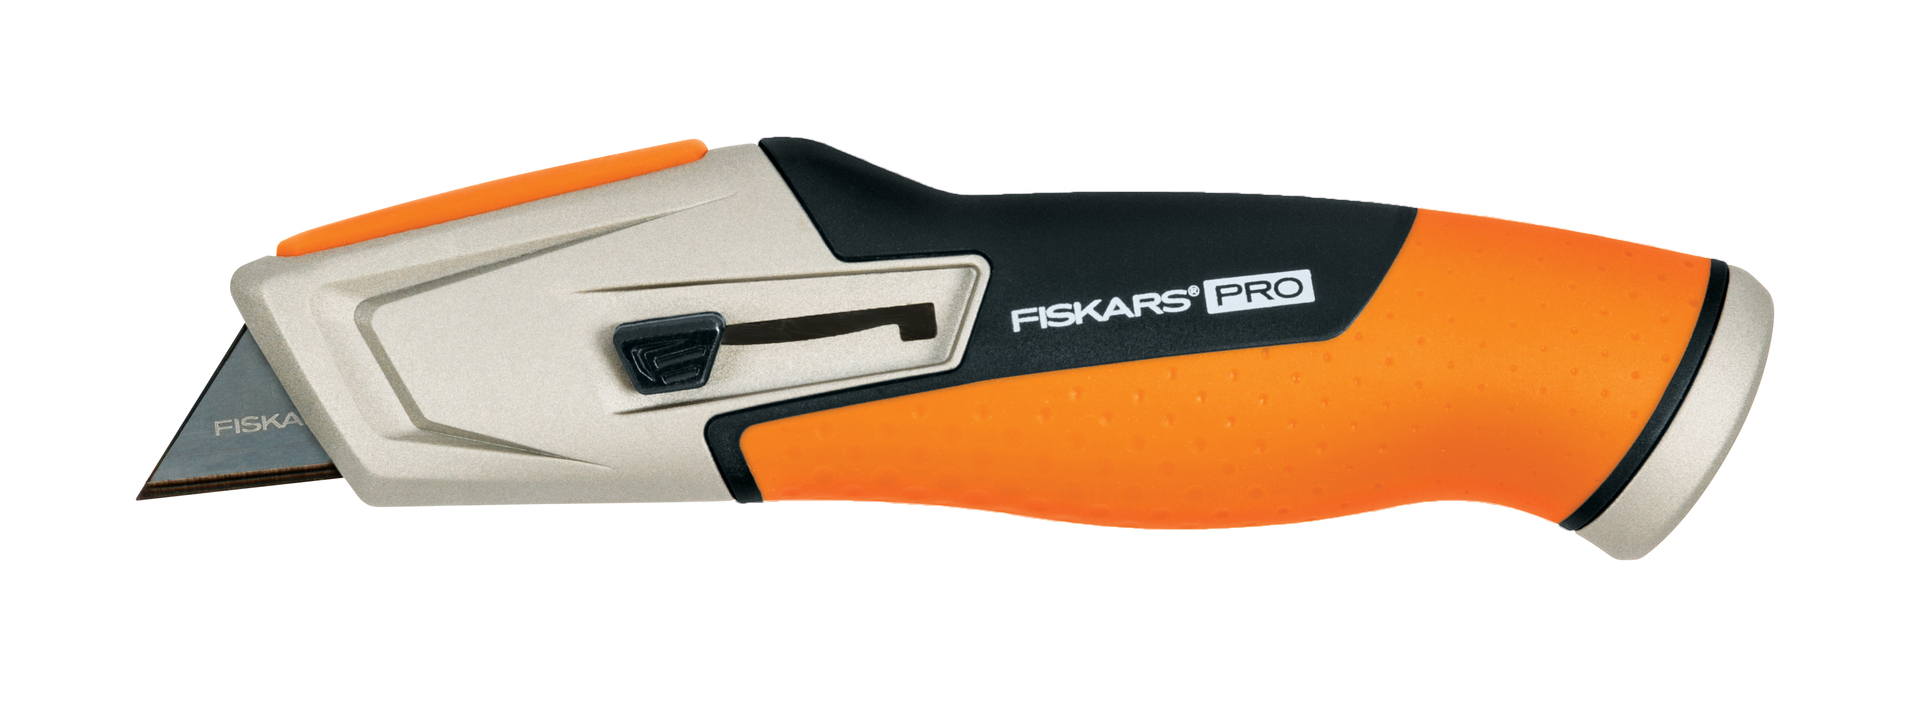 Carbon Max retractable utility knife HB